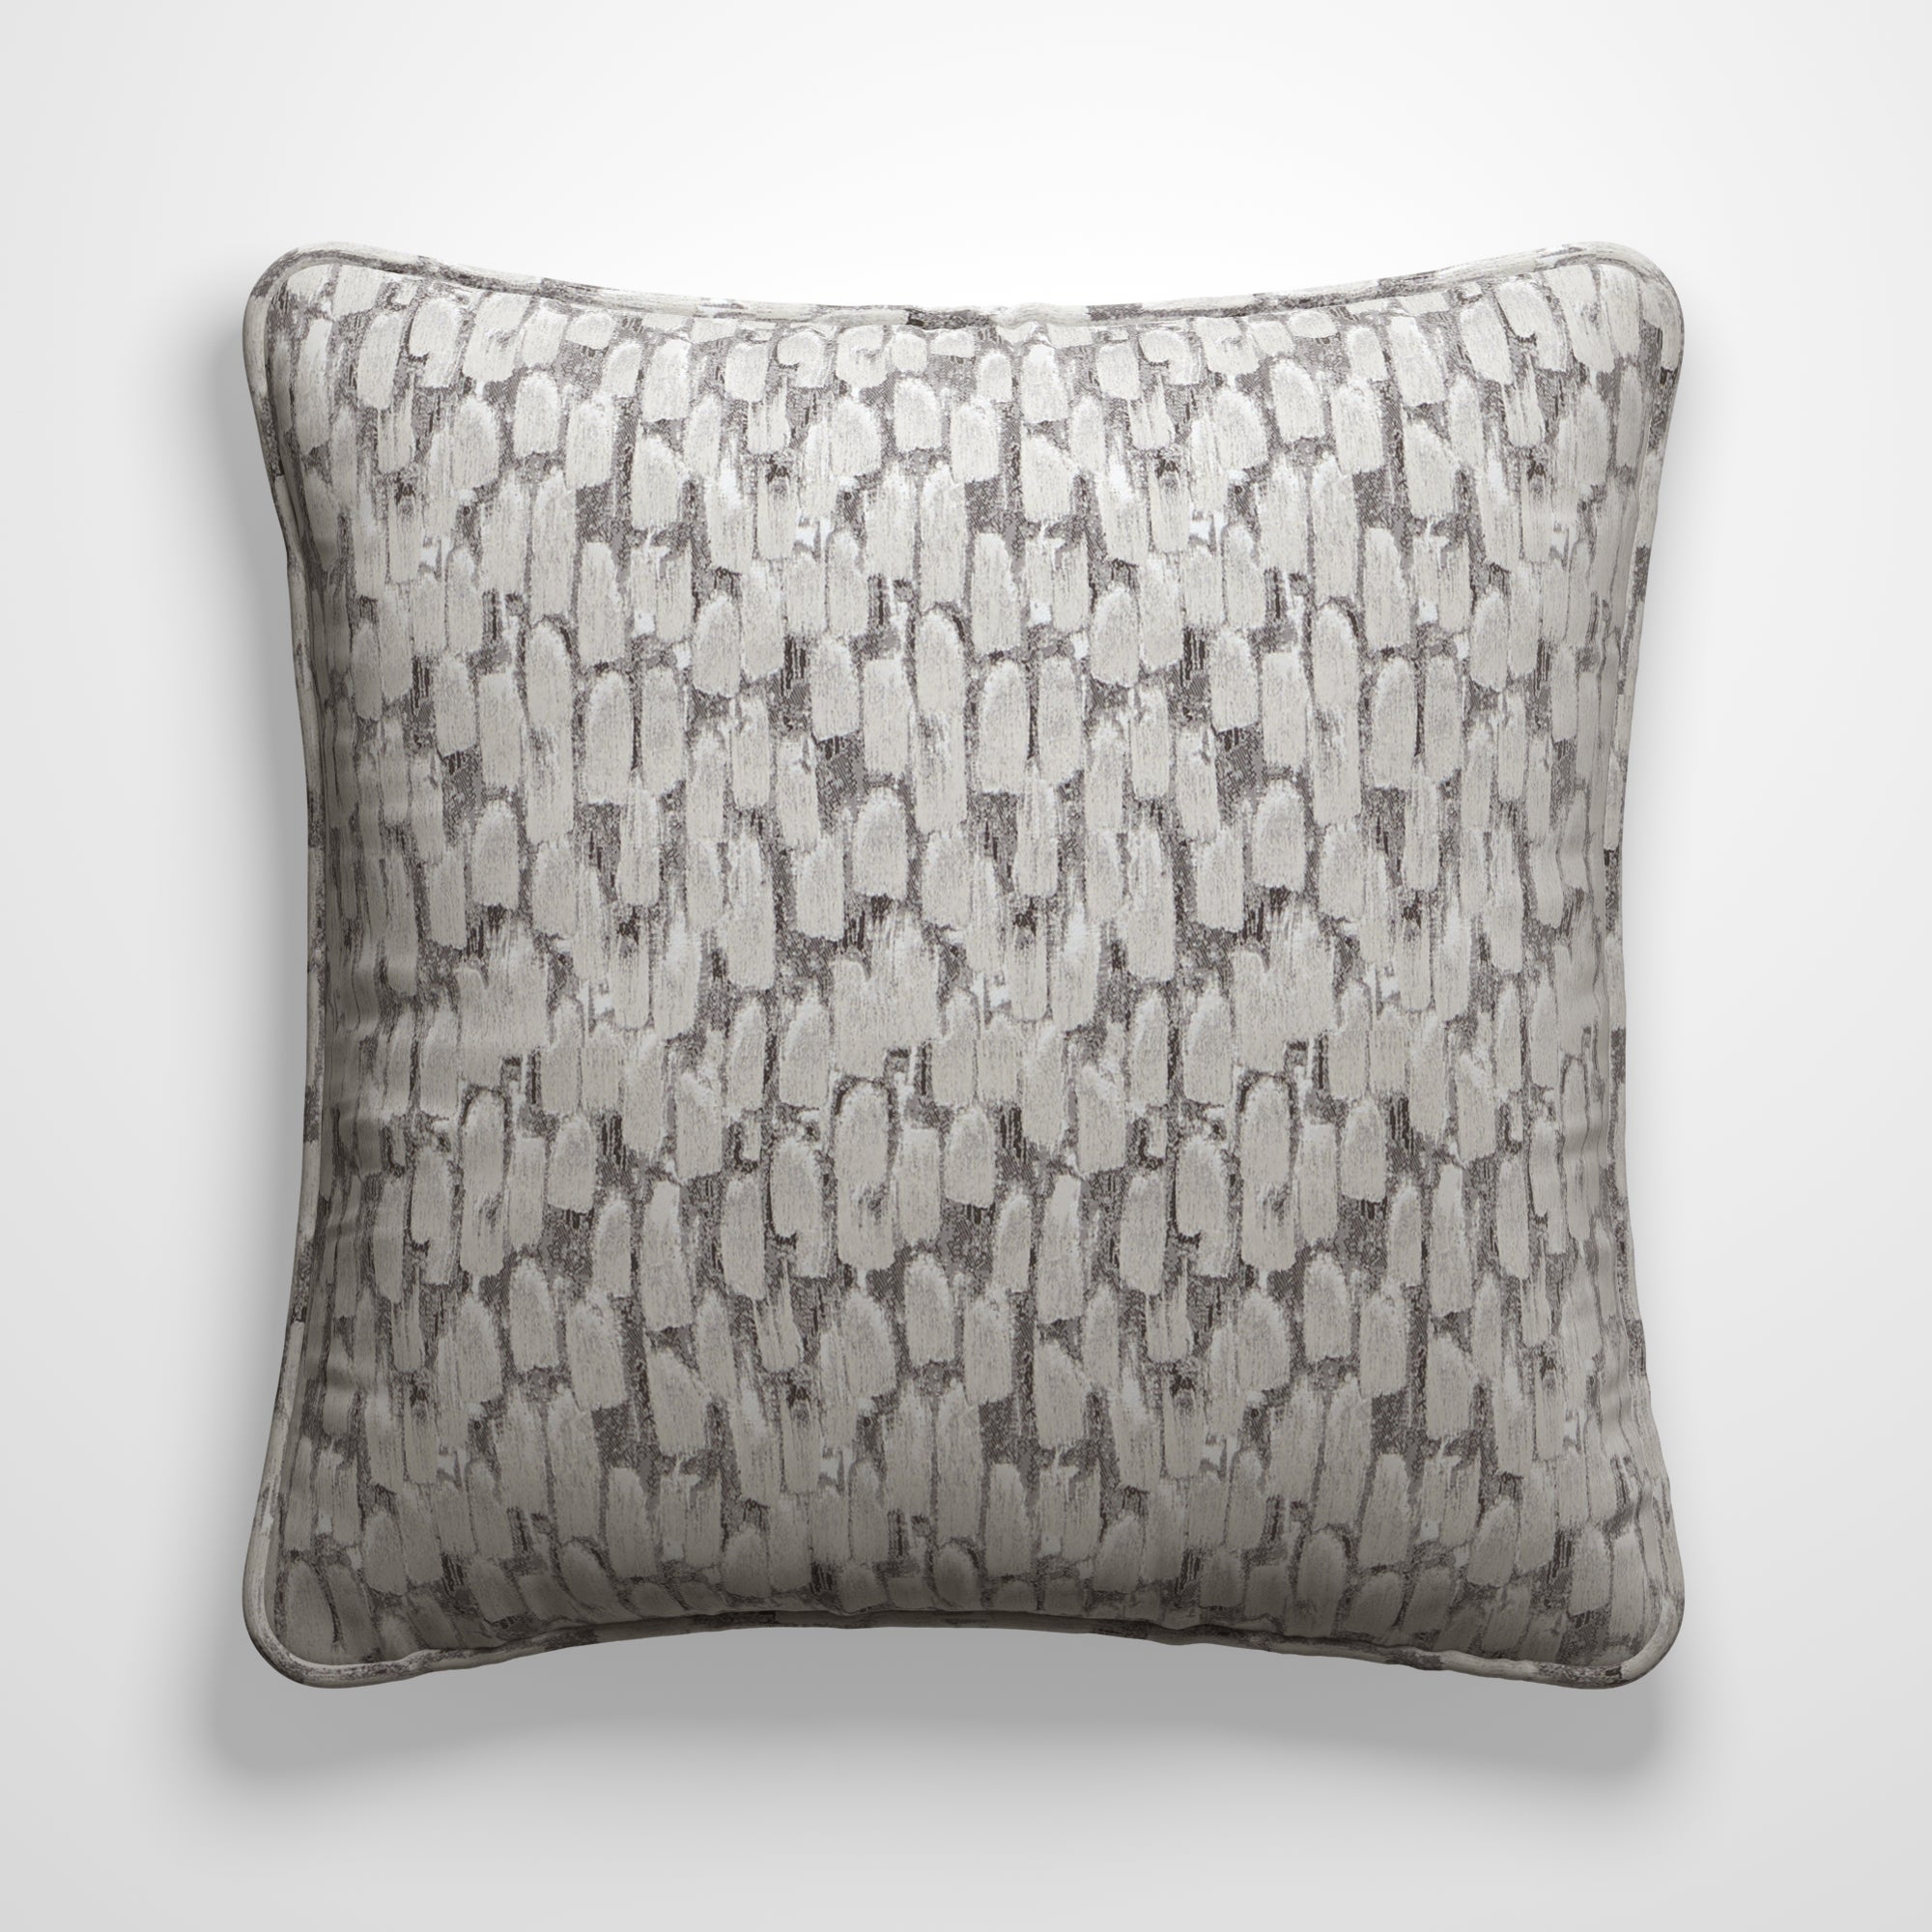 Meteor Made to Order Cushion Cover Meteor Champagne